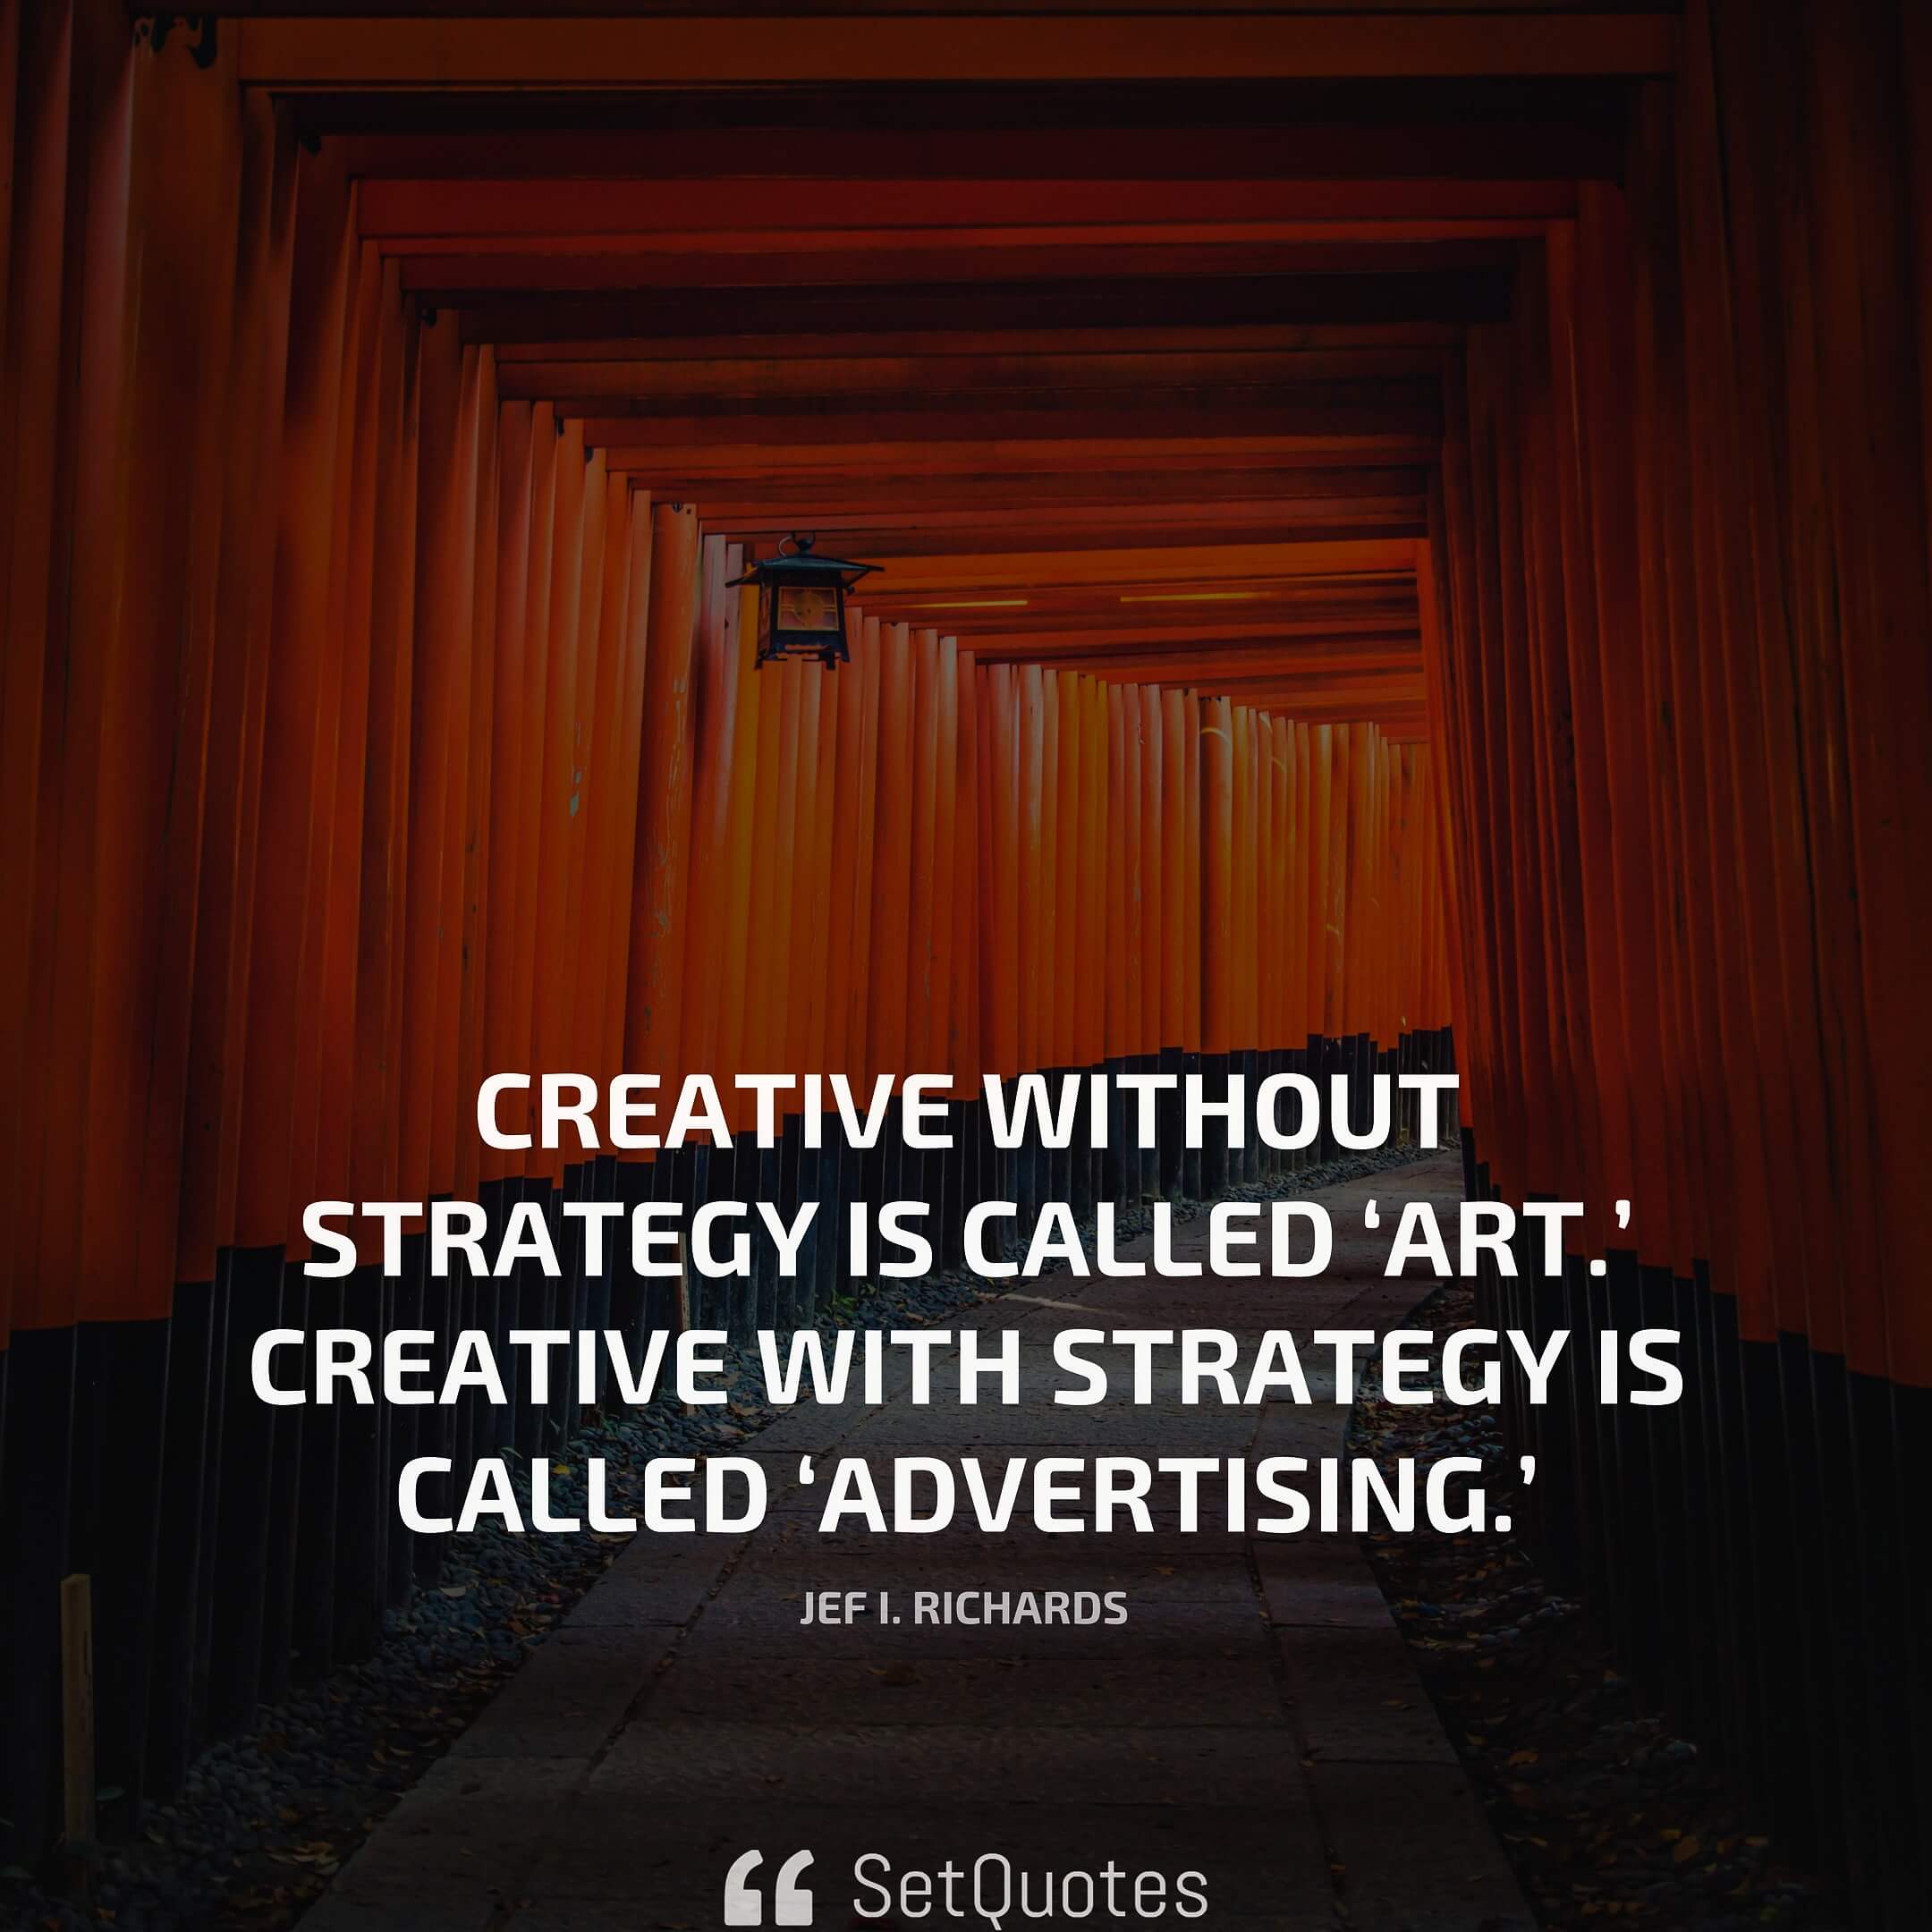 Creative without strategy is called ‘art.’ Creative with strategy is called ‘advertising.’ – Jef I. Richards